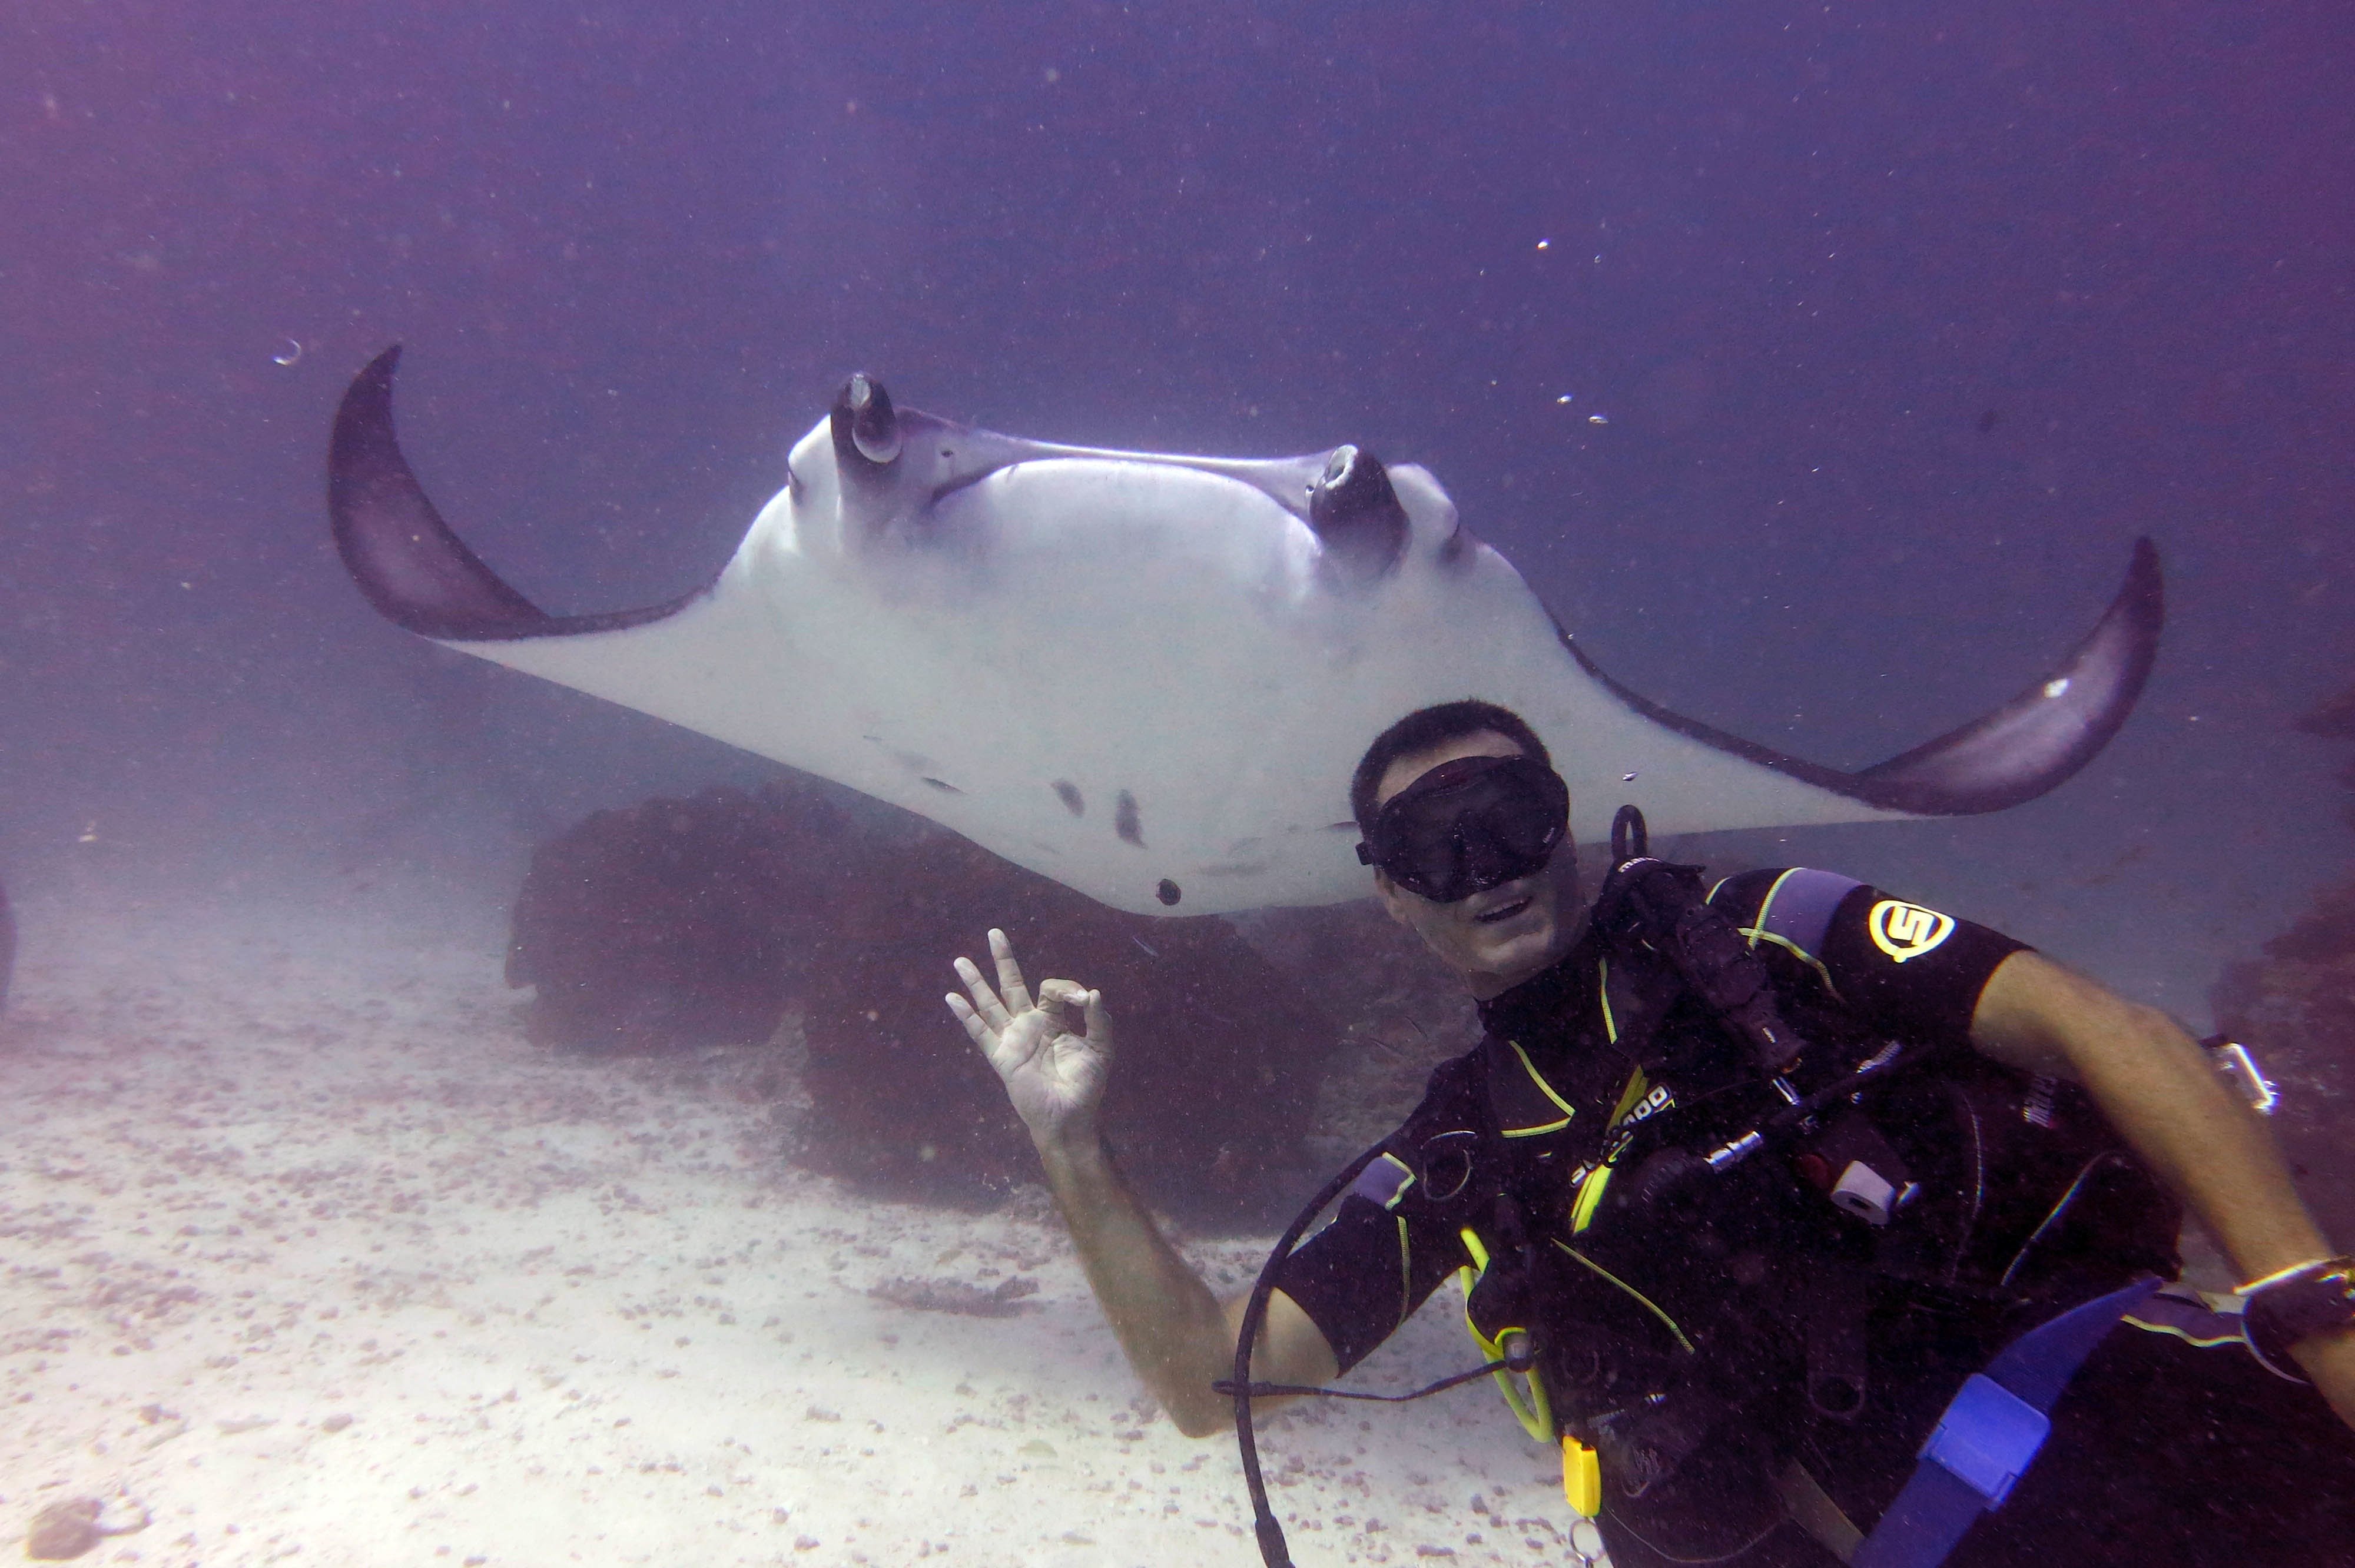 The lowdown on scuba diving – if you have never tried it!